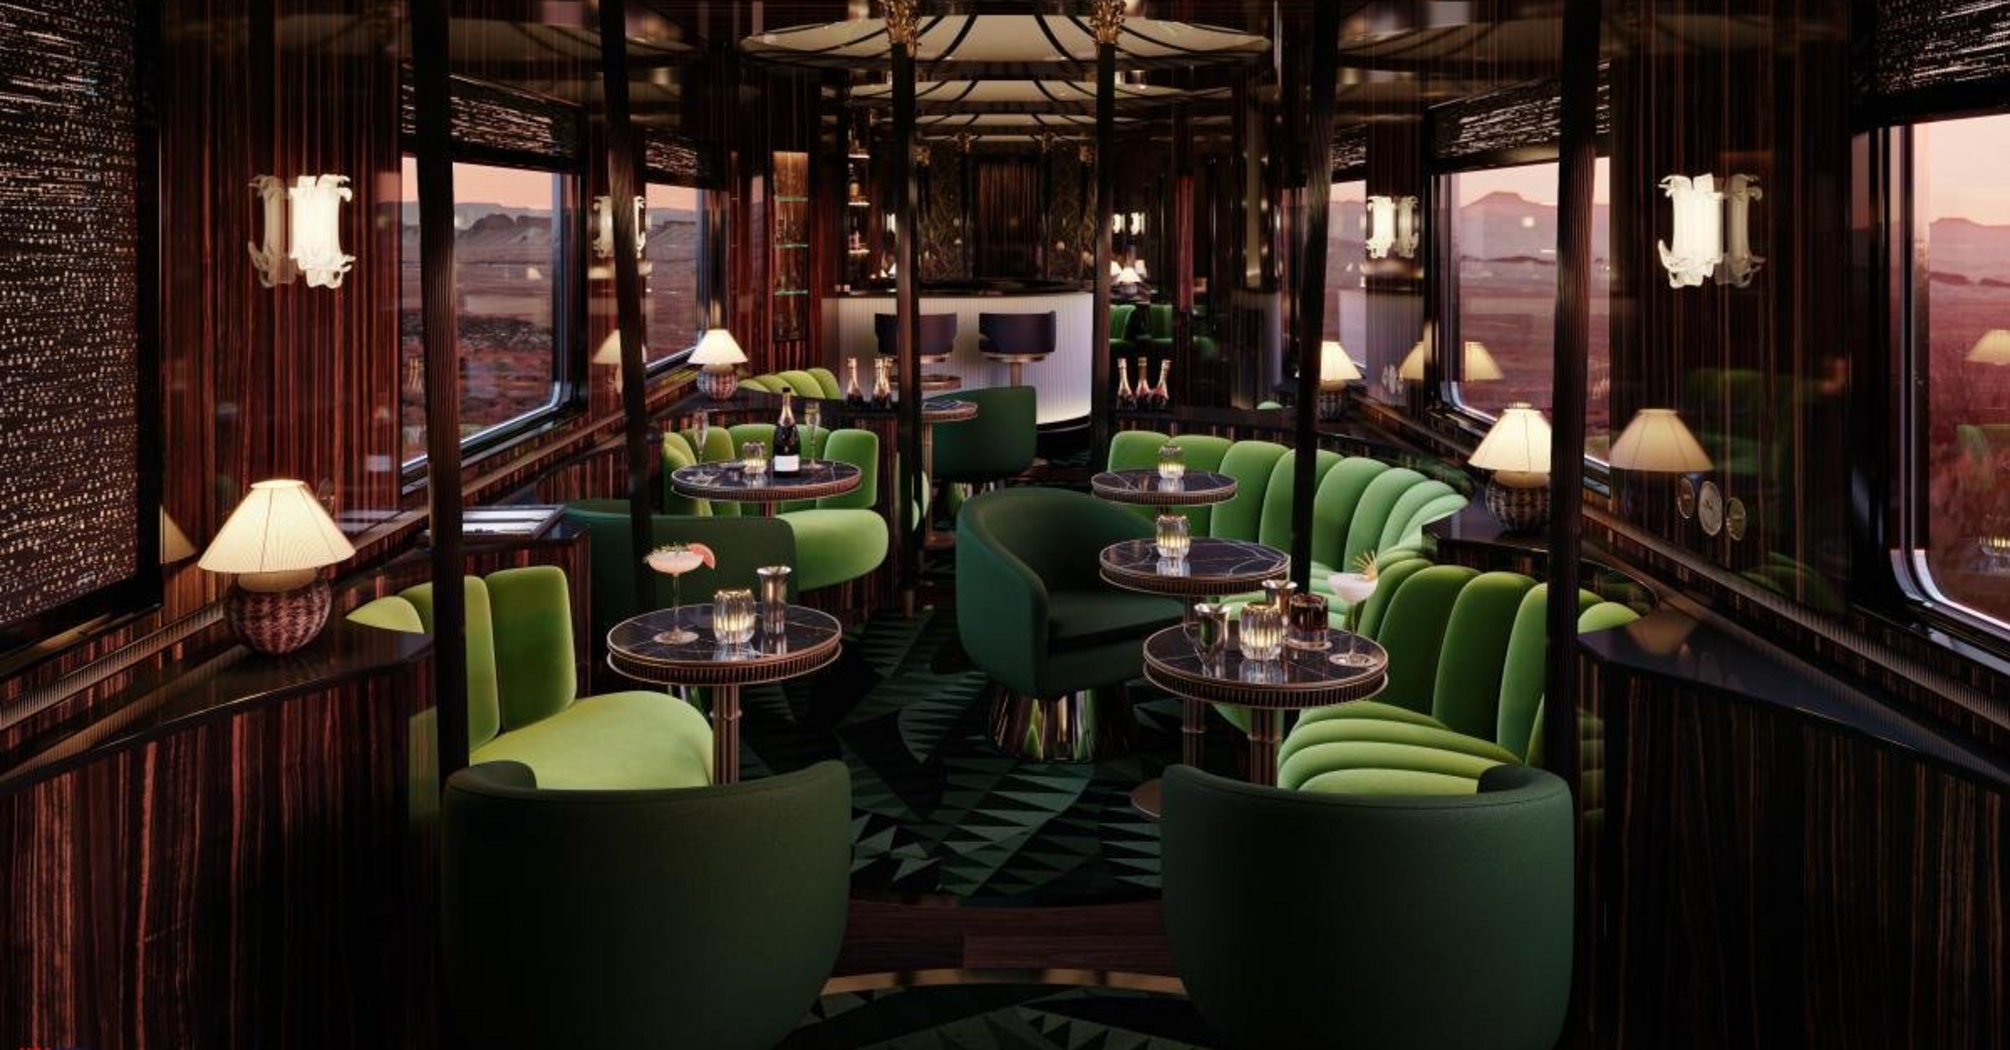 The legendary "Orient Express" is making a comeback: luxury travel is being considered in Paris